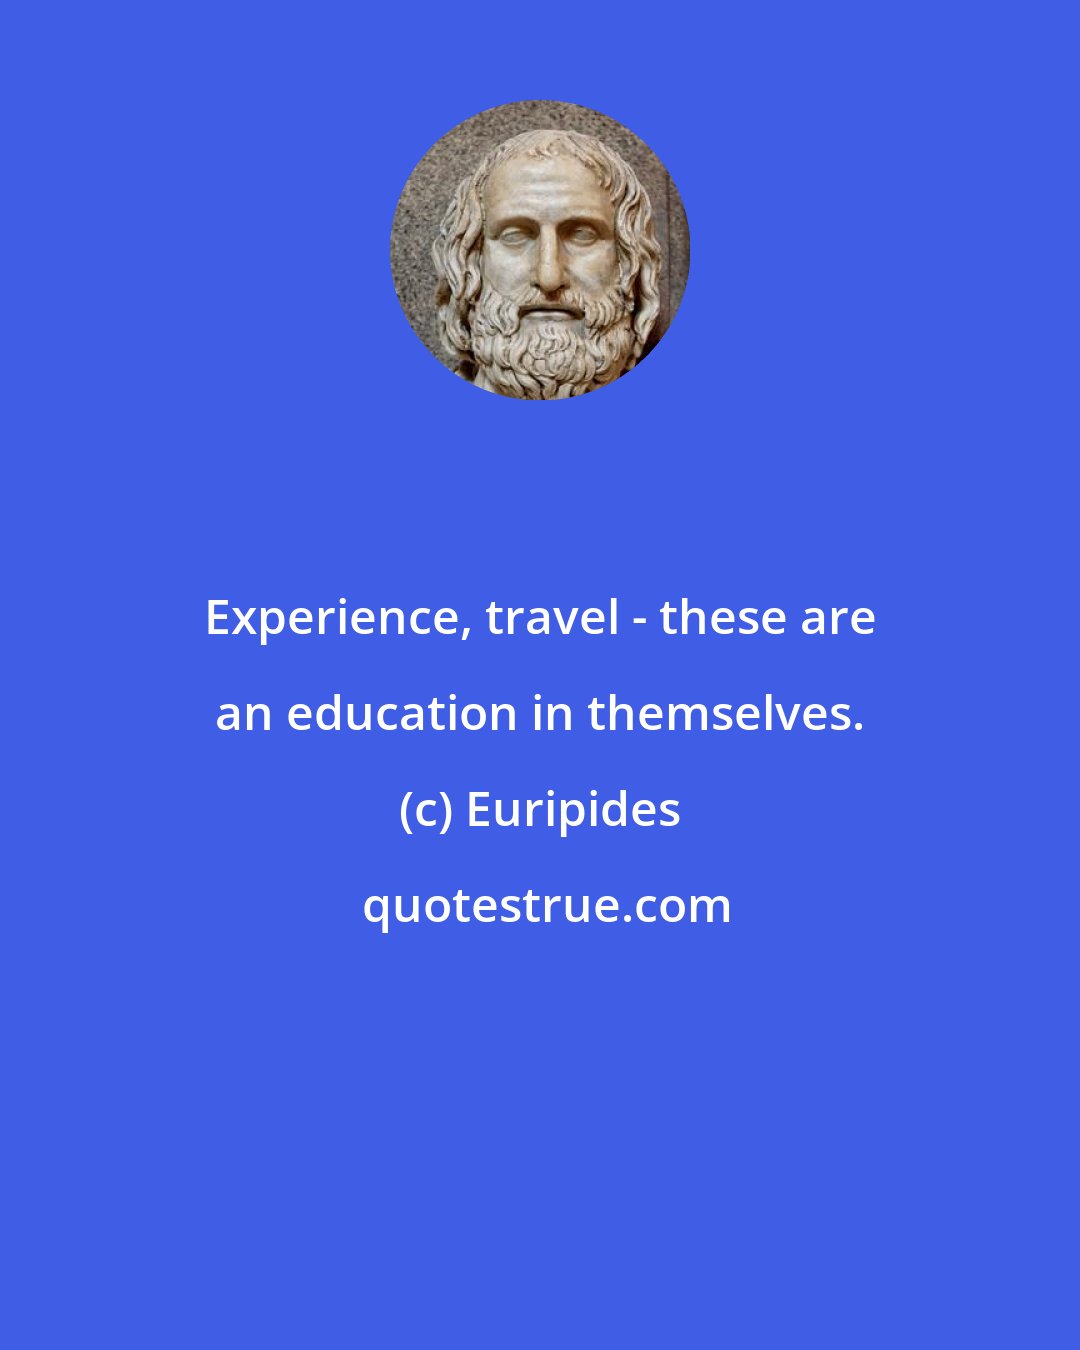 Euripides: Experience, travel - these are an education in themselves.